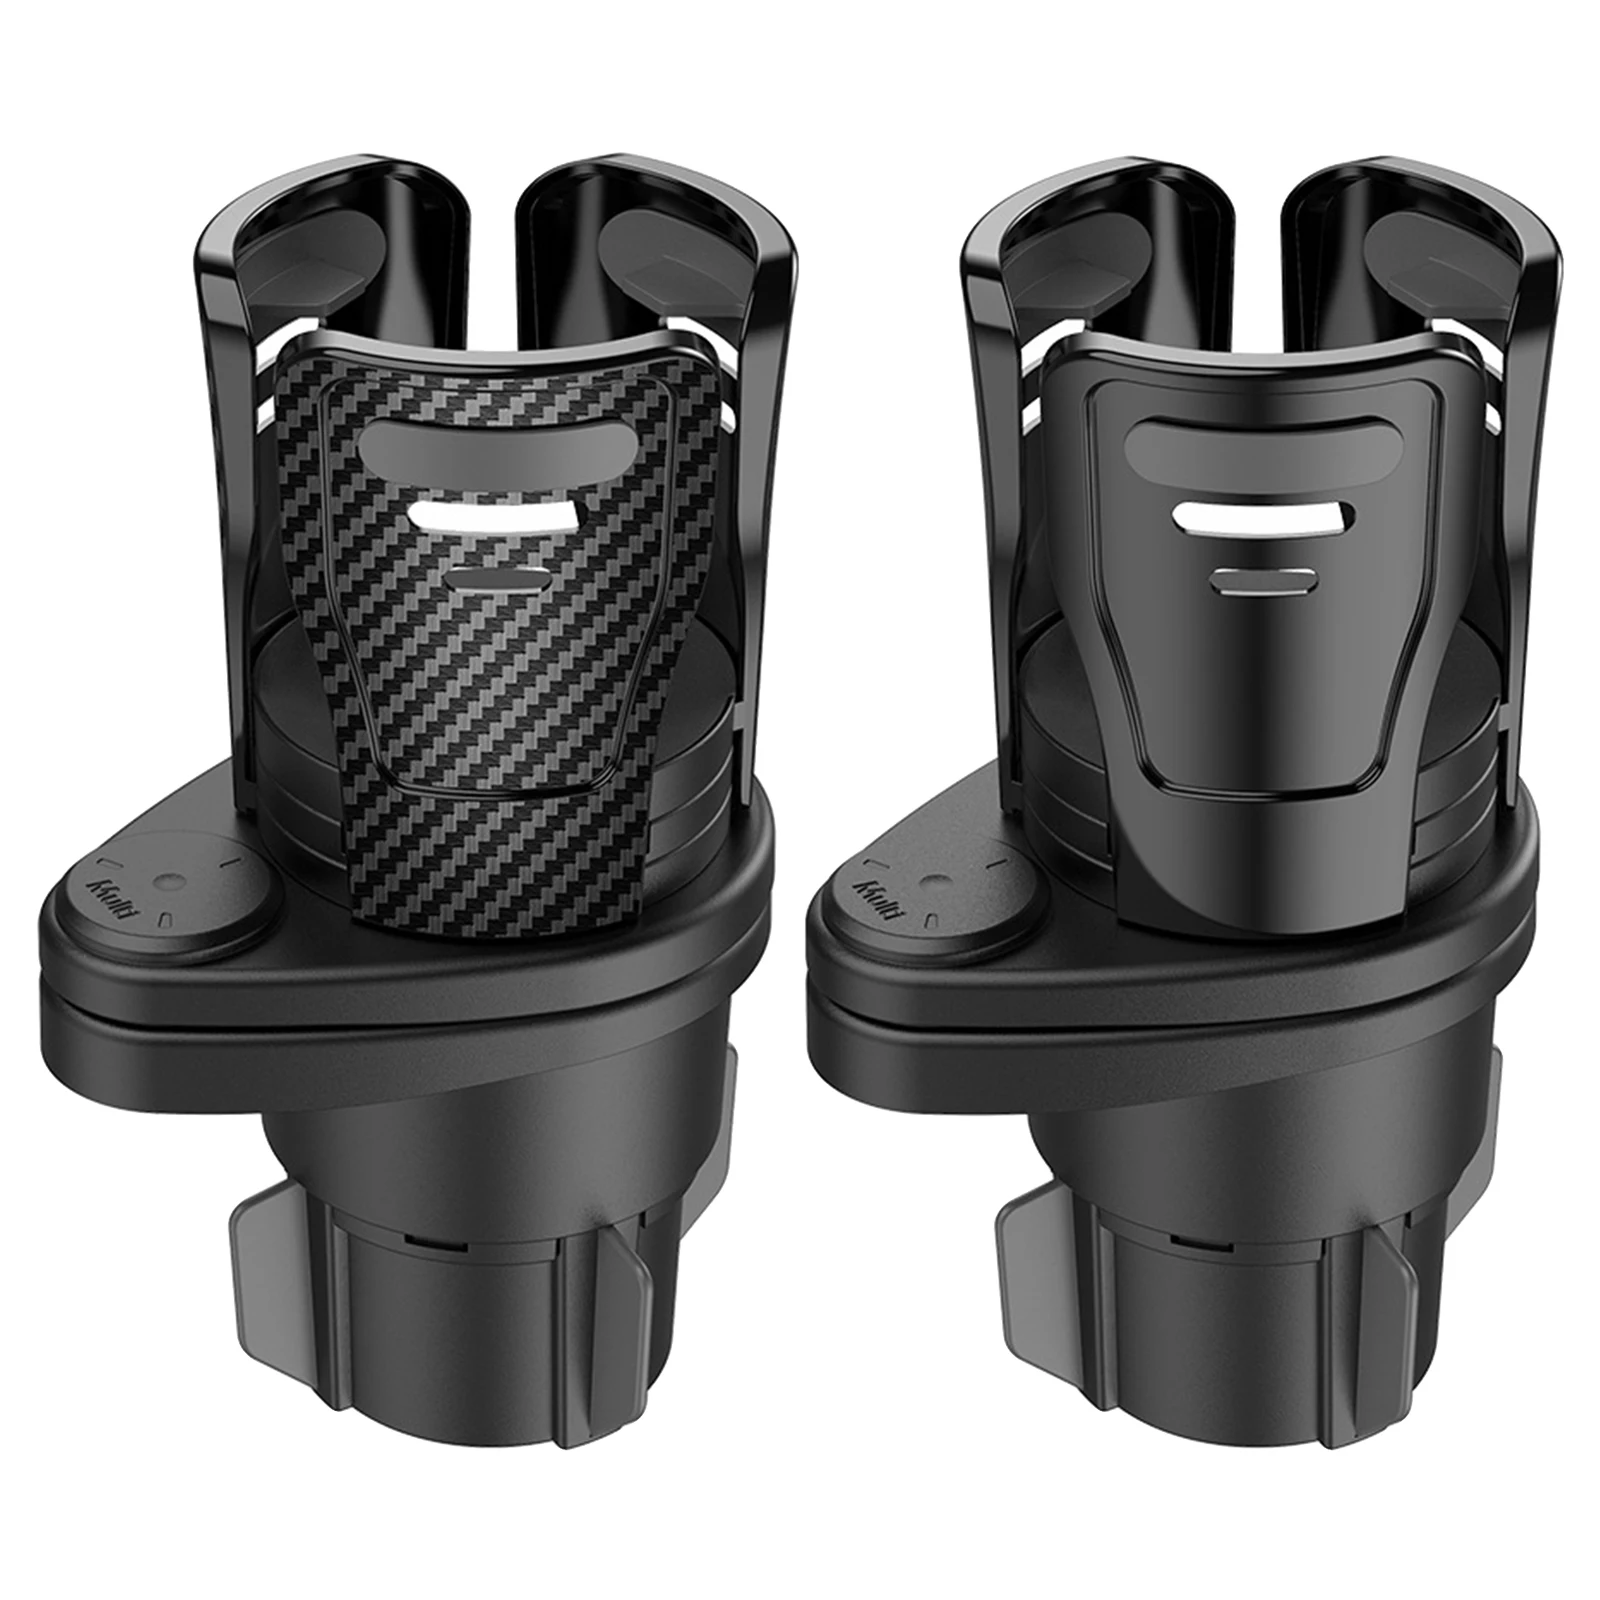 Car Cup Holder Expander 2 in 1 Cups Stand 360 Rotating Adjustable Base Automotive Universal Bottle Organizers for Most Cup